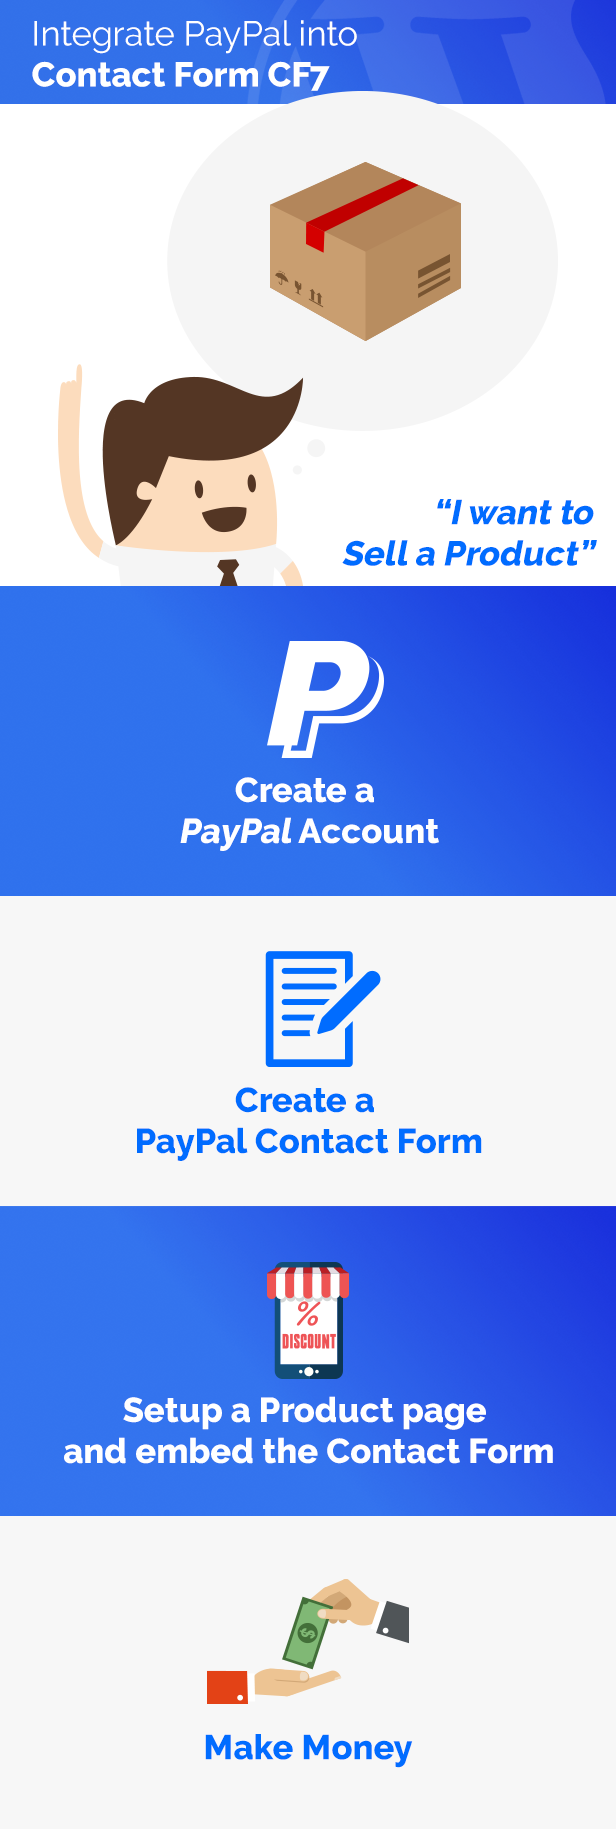 Create a PayPal Account, Setup a contact form, embed it on a page and make money.